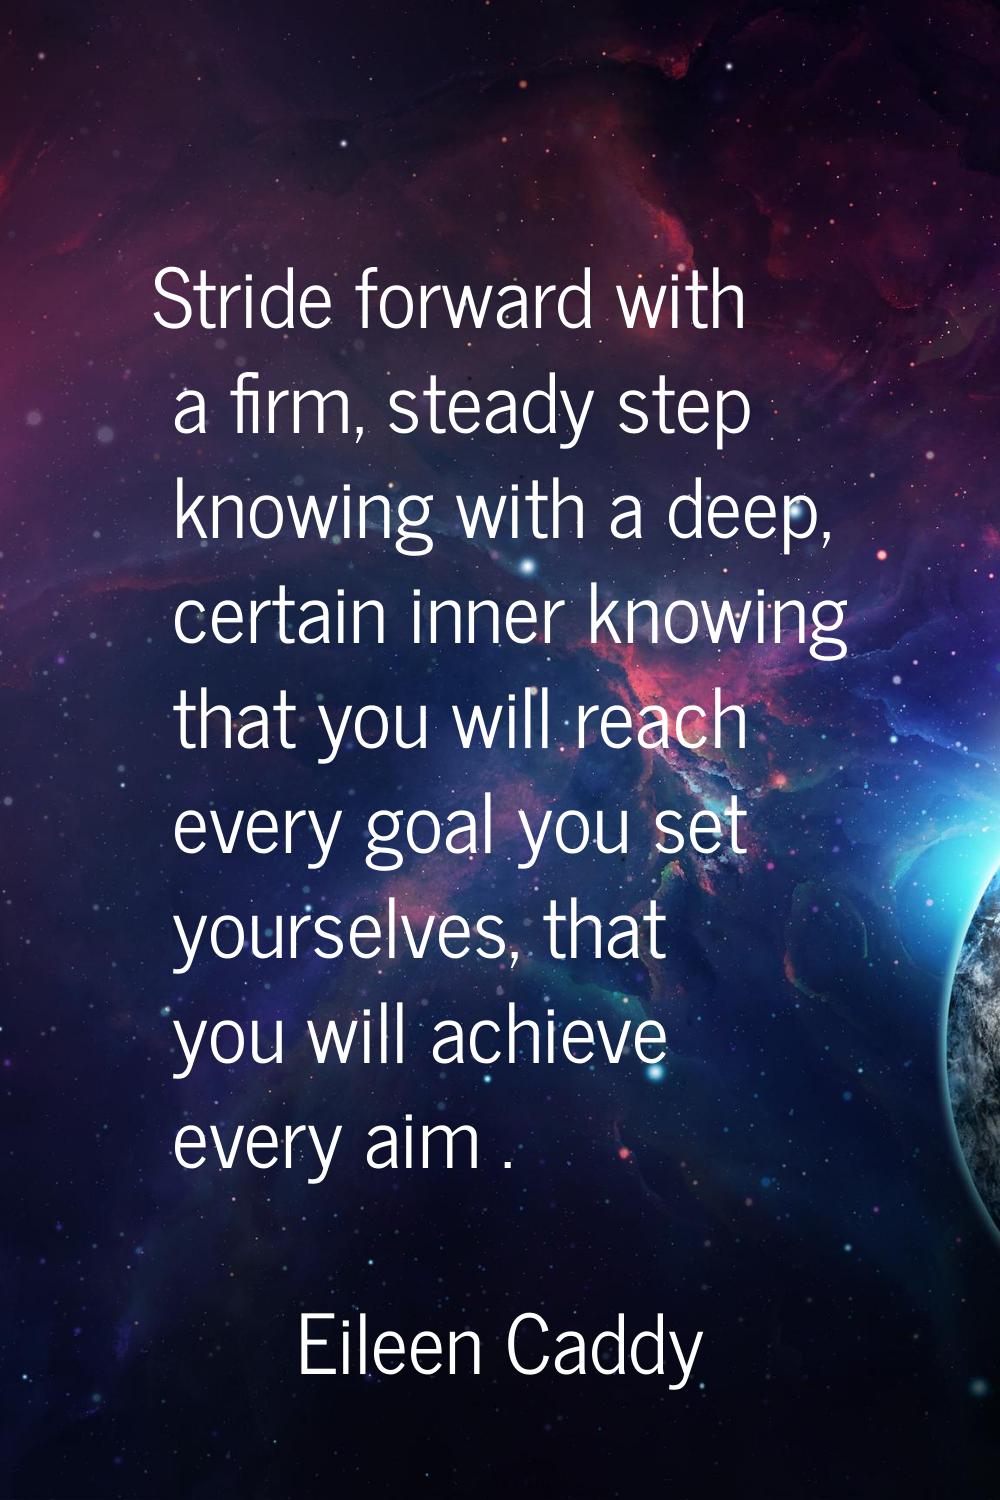 Stride forward with a firm, steady step knowing with a deep, certain inner knowing that you will re